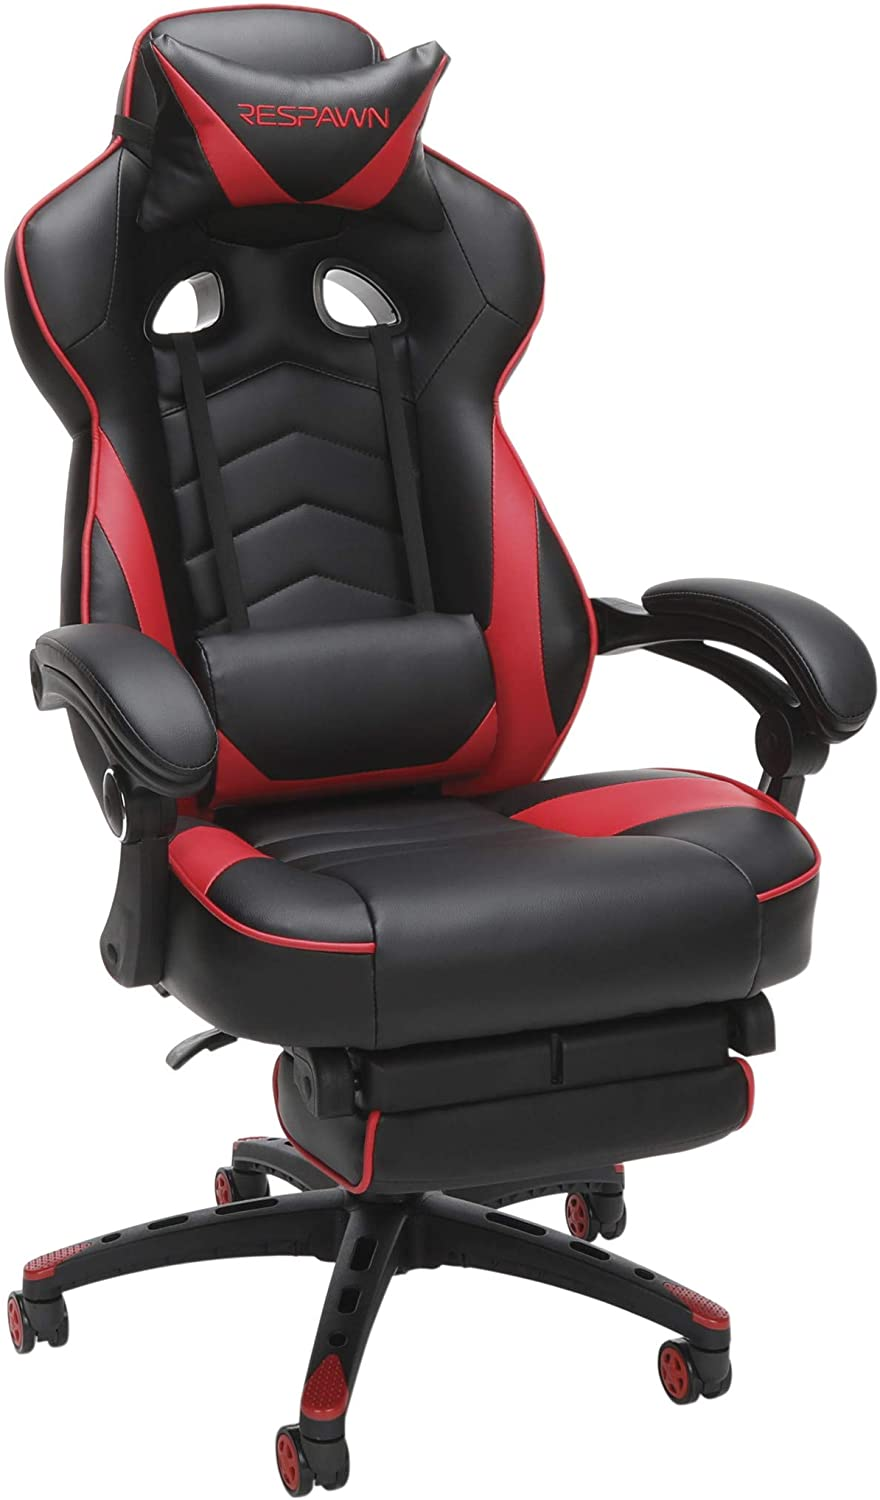 Amazon.com: RESPAWN 110 Racing Style Gaming Chair, Reclining Ergonomic Chair with Footrest, in Red : Home & Kitchen $119.62